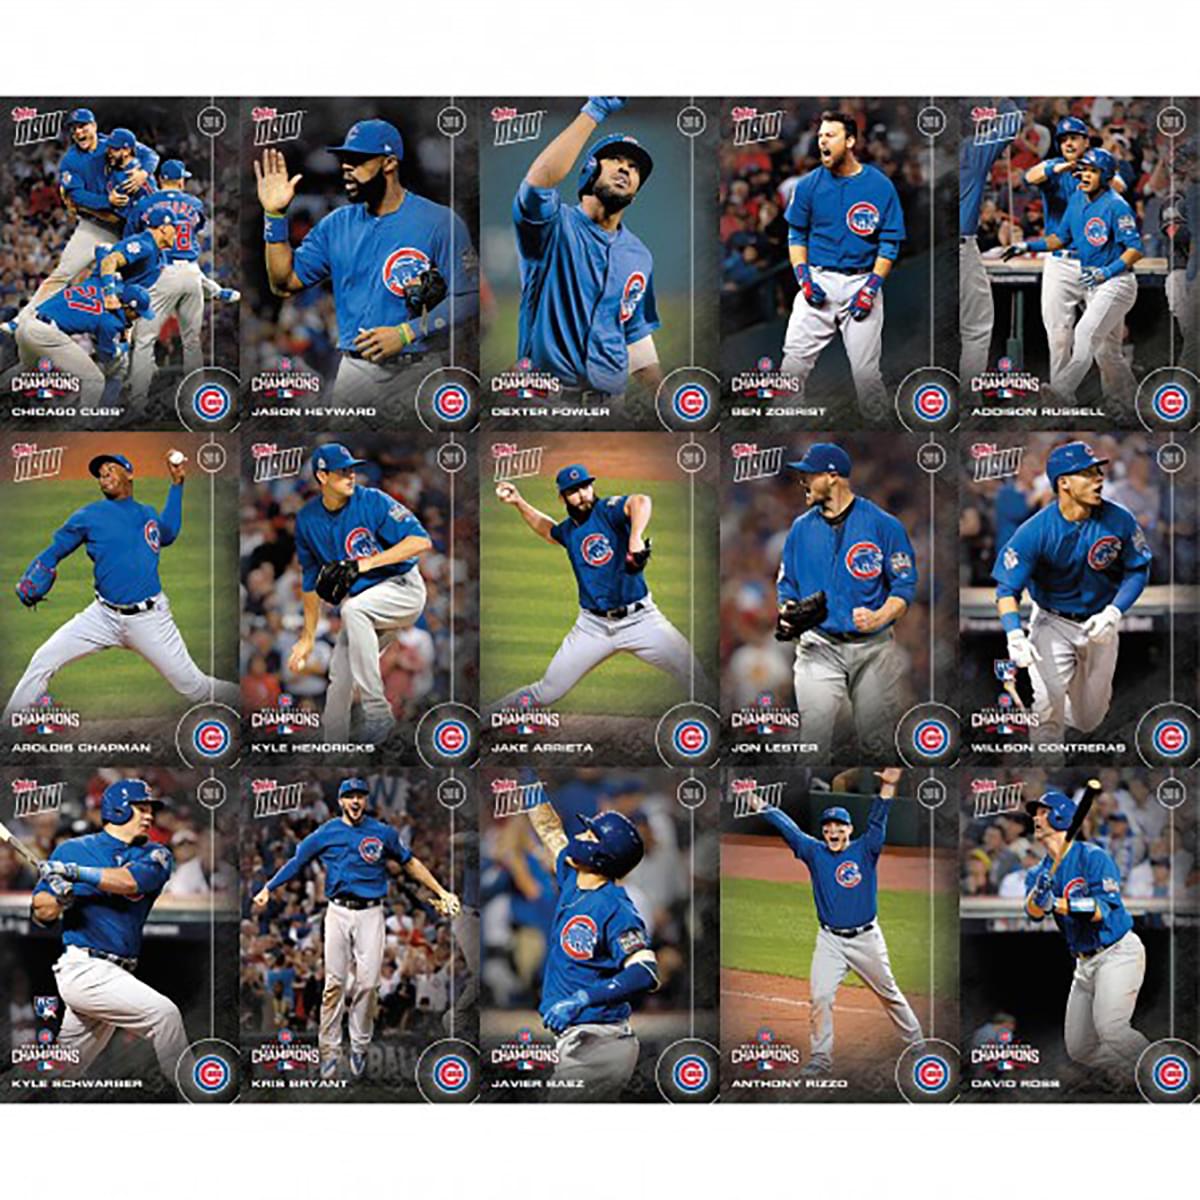 MLB Chicago Cubs 2016 World Series Championship Topps Trading Card Set